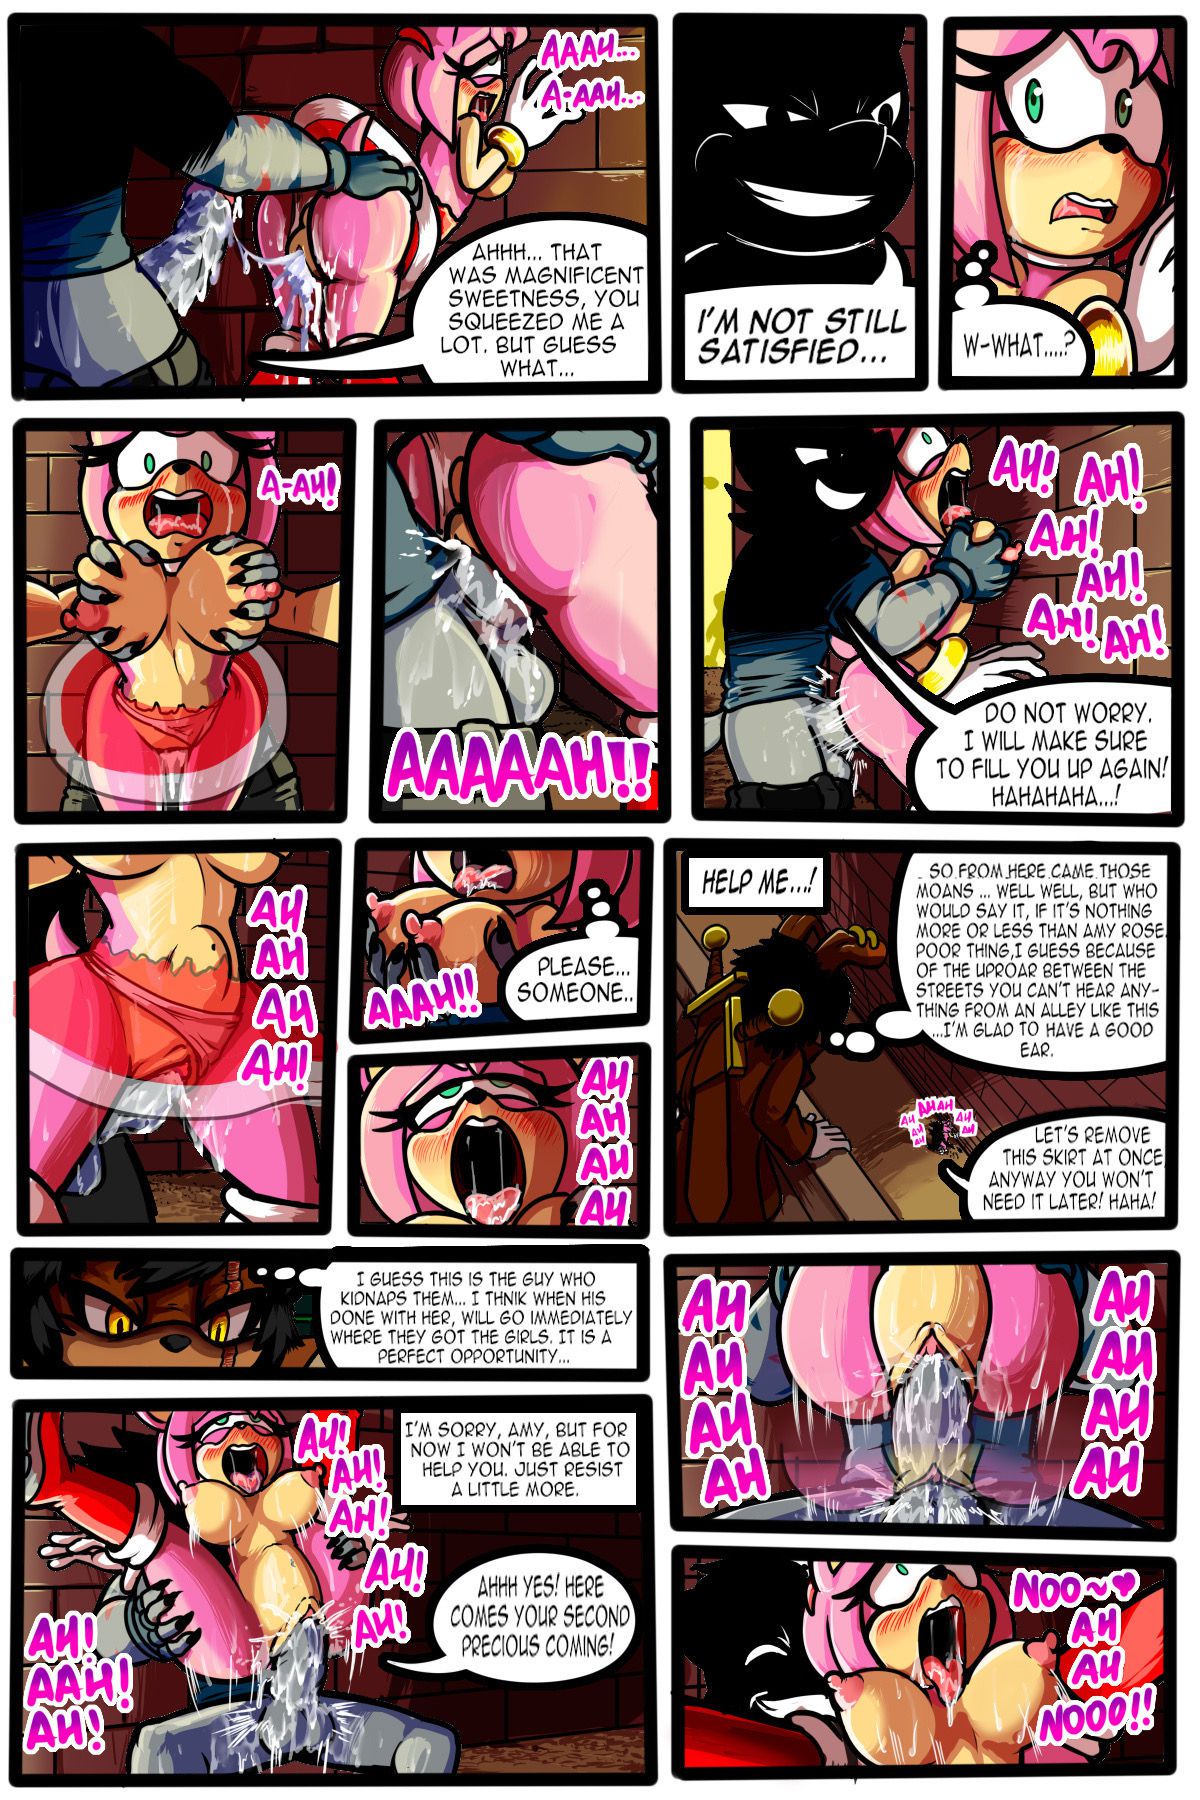 The Alley of Sex (Ongoing) 6